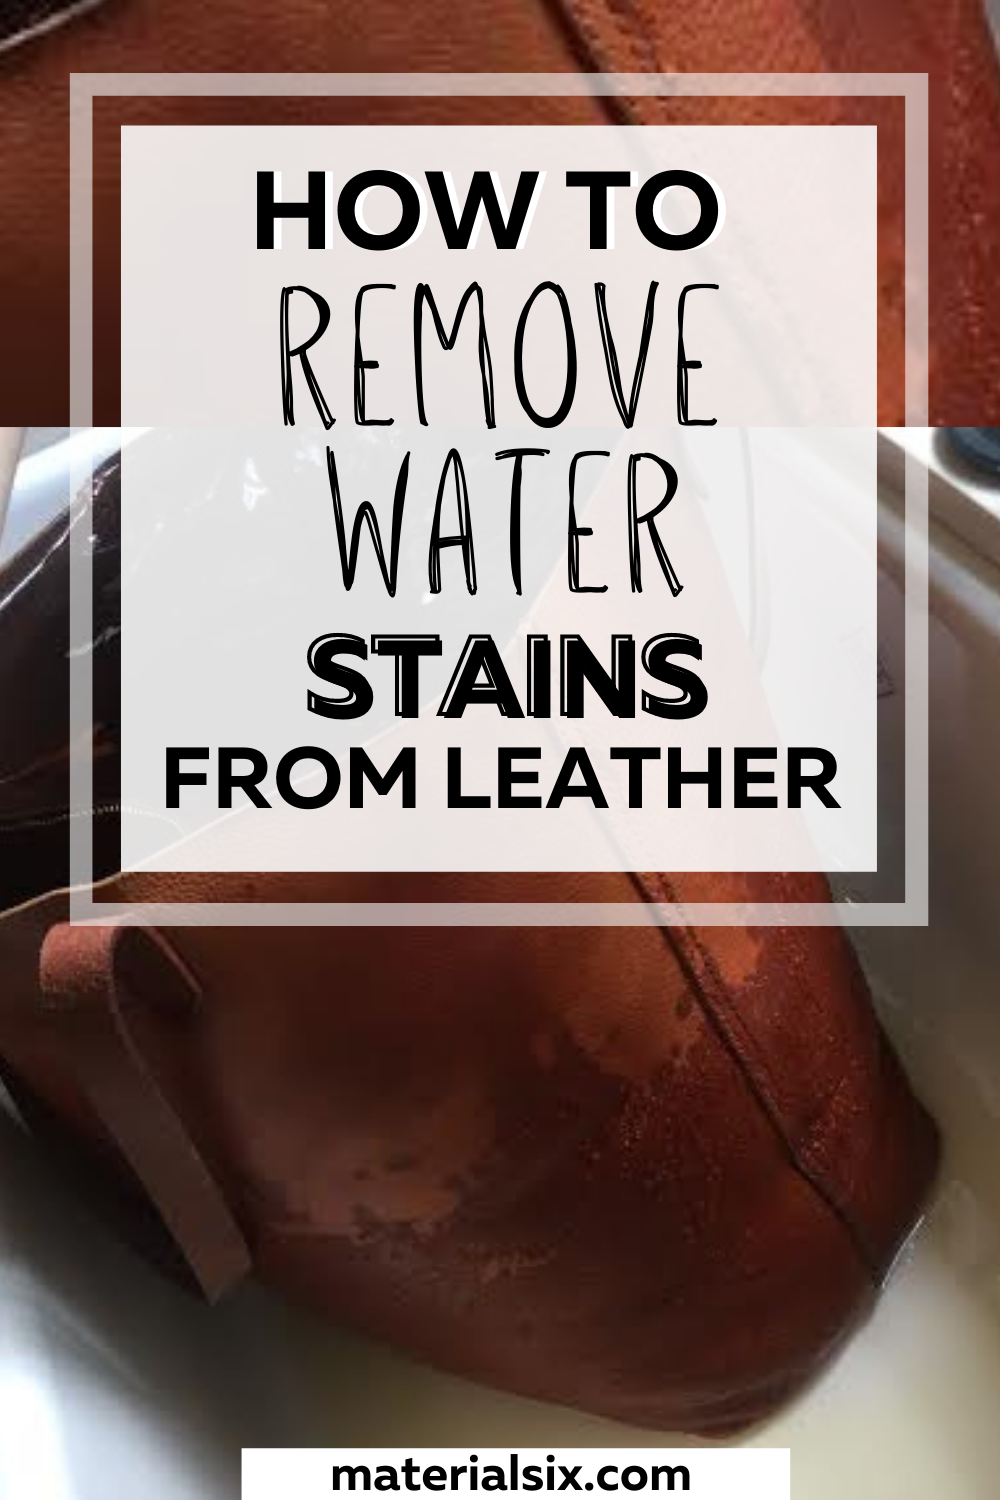 How to Remove Water Stains From Leather